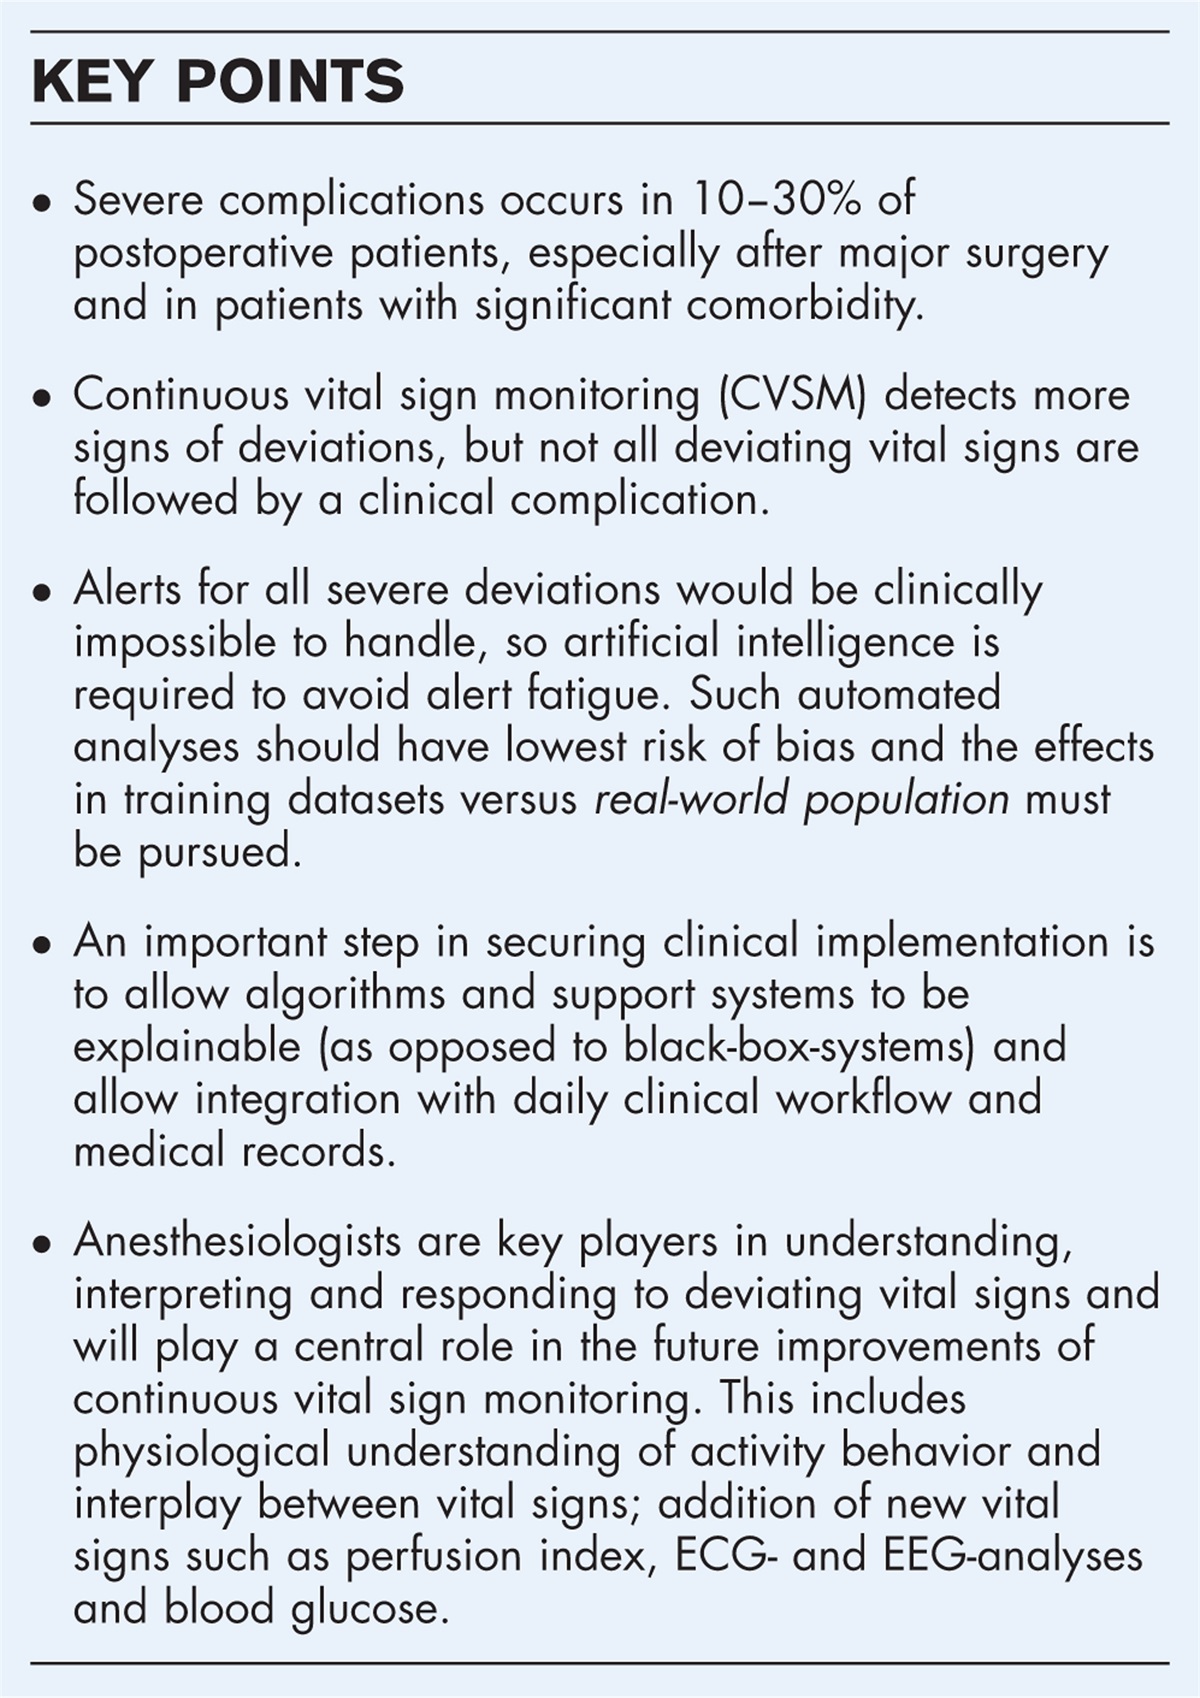 The future of postoperative vital sign monitoring in general wards: improving patient safety through continuous artificial intelligence-enabled alert formation and reduction